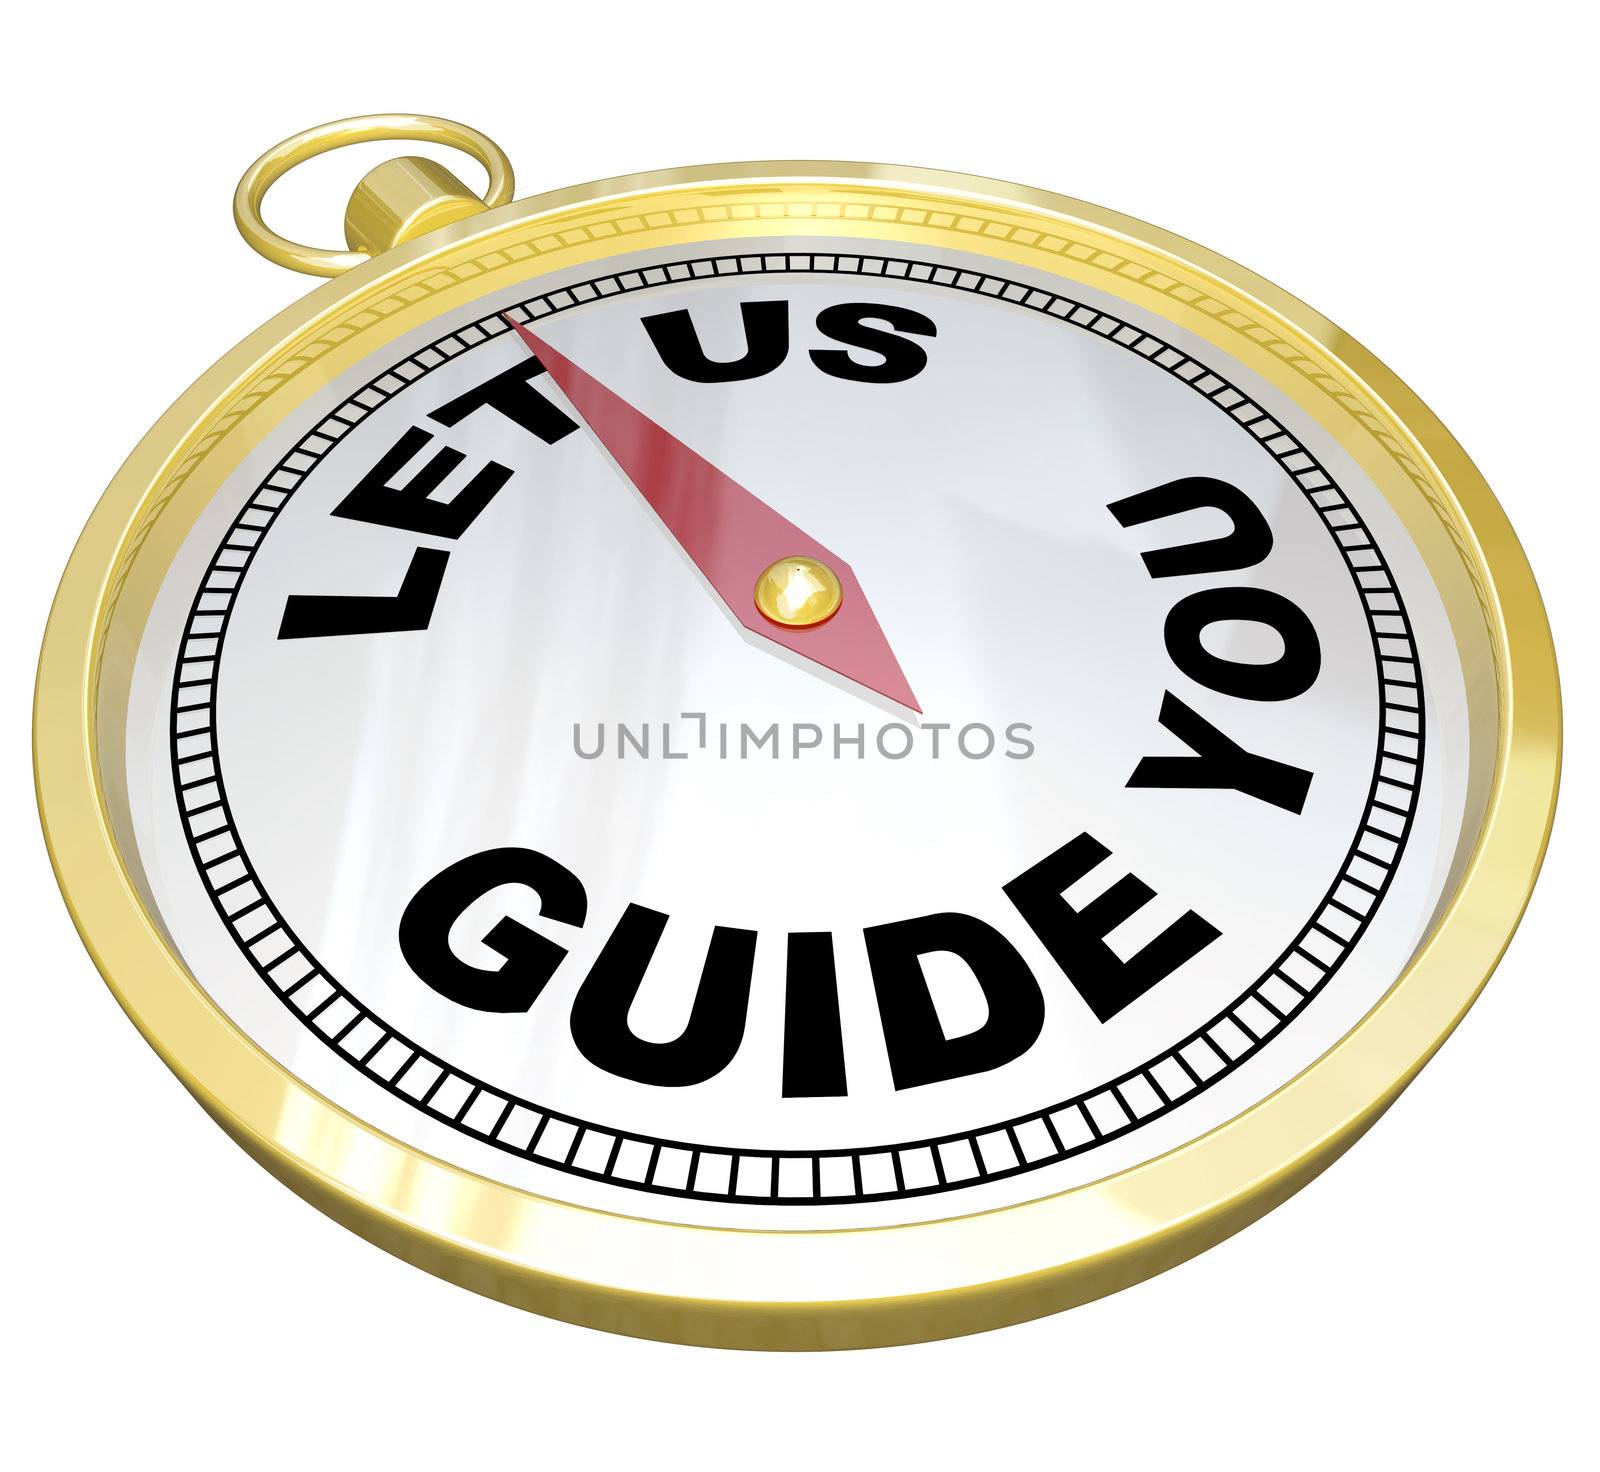 A gold compass with the words Let Us Guide You representing the offering of help, advice, customer service, moral support or general assistance to someone in need